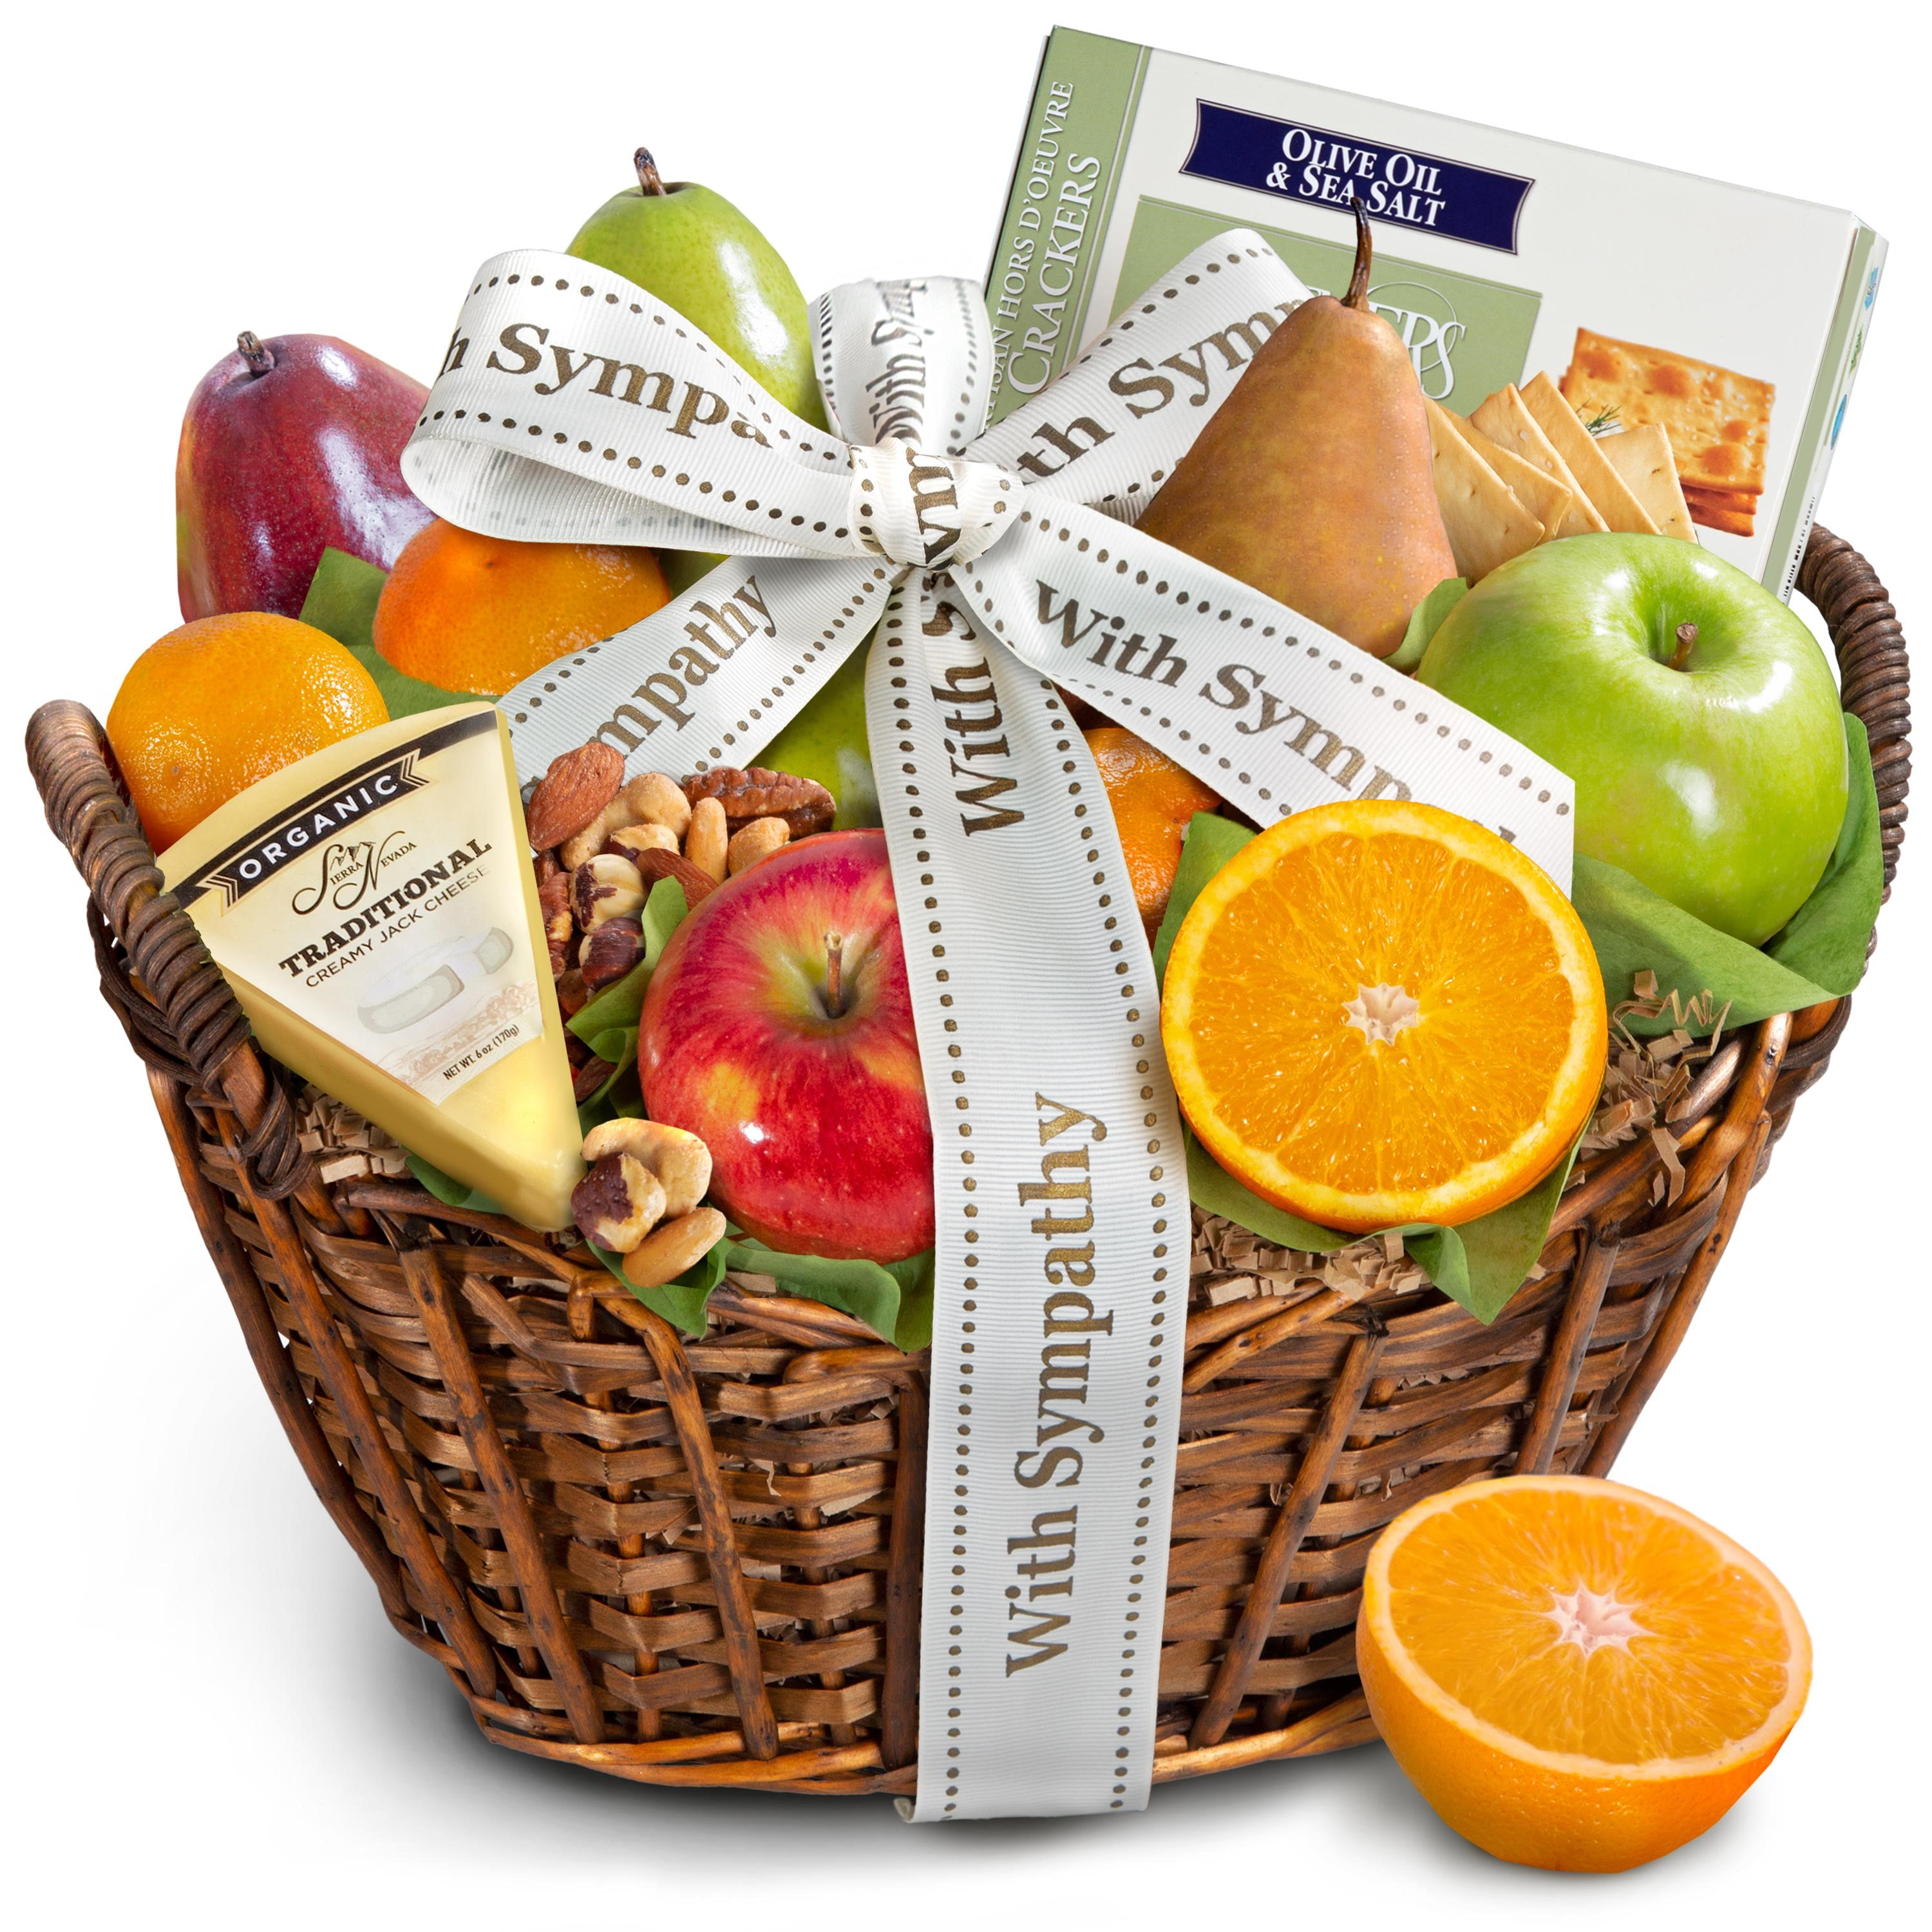 The New Parents Snack Platter - baby gift baskets - USA delivery